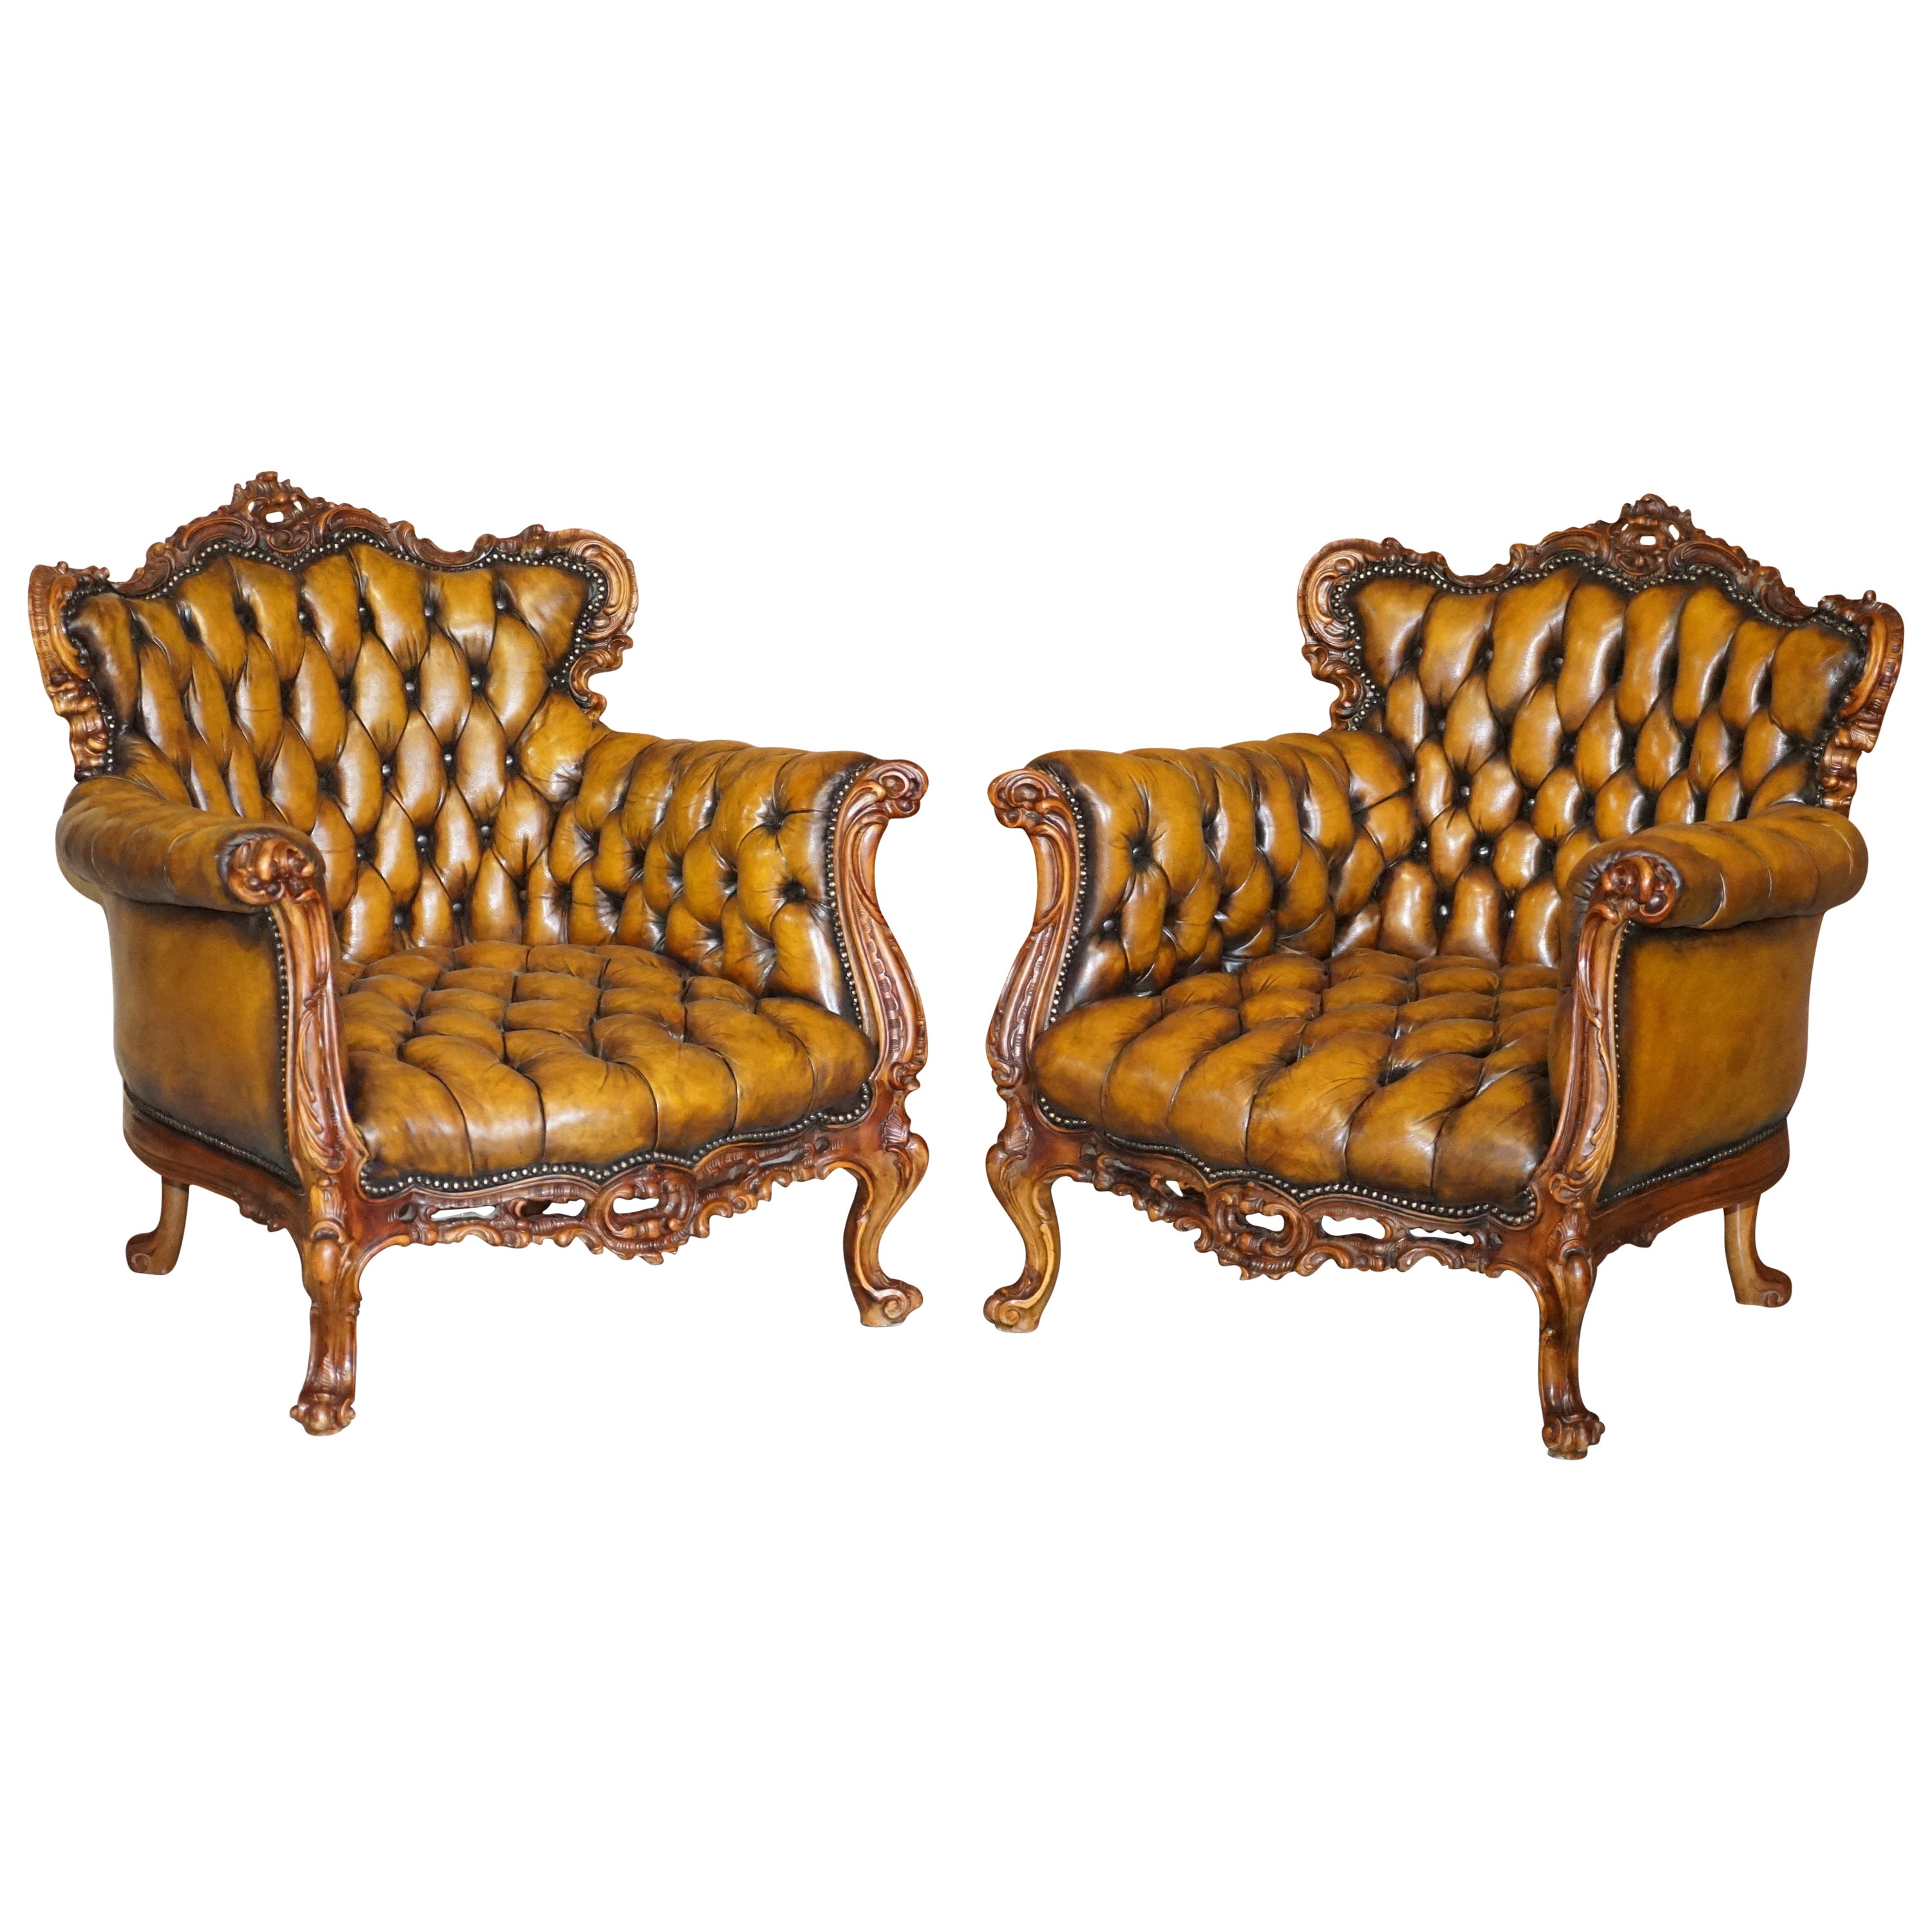 Pair of Stunning circa 1900 Carved Walnut & Brown Leather Chesterfield Armchairs